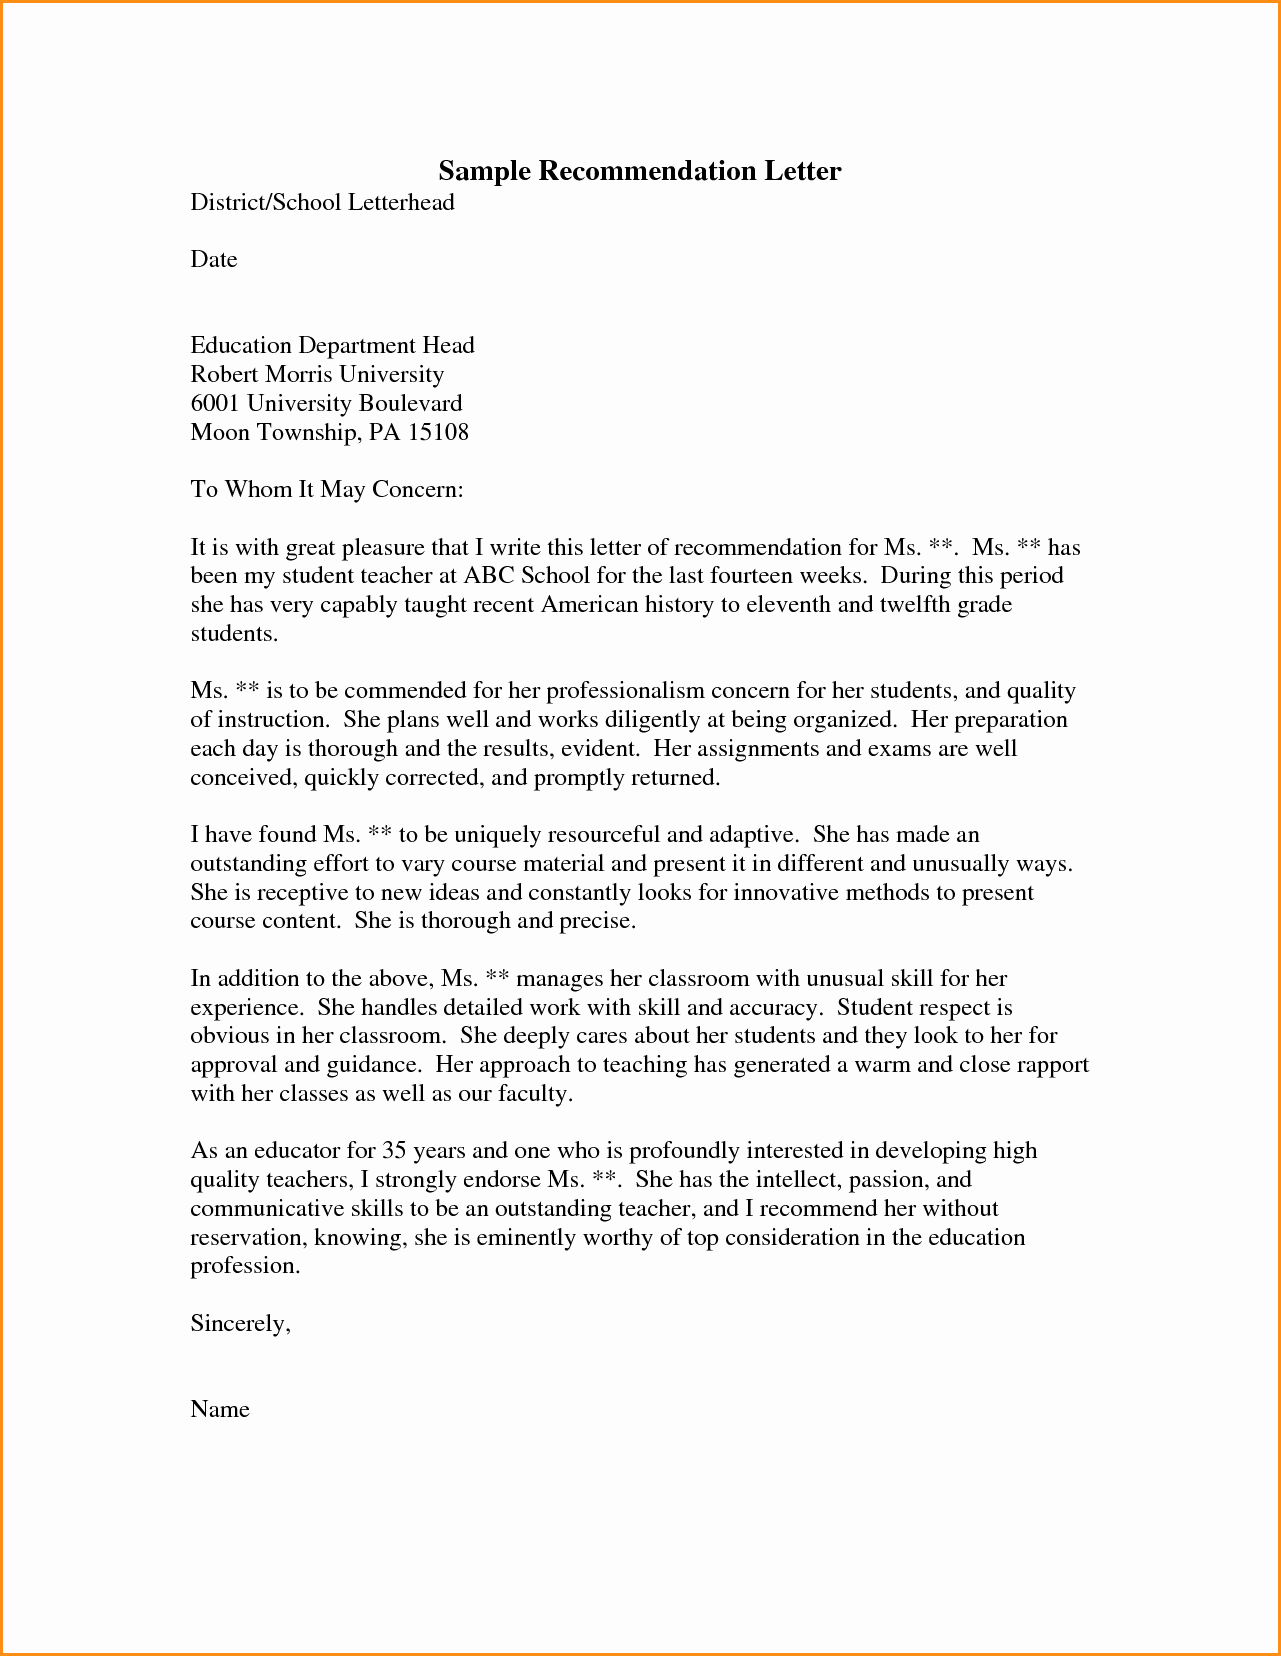 Format for Letters Of Recommendation Awesome 6 Graduate Re Mendation Letter Samples